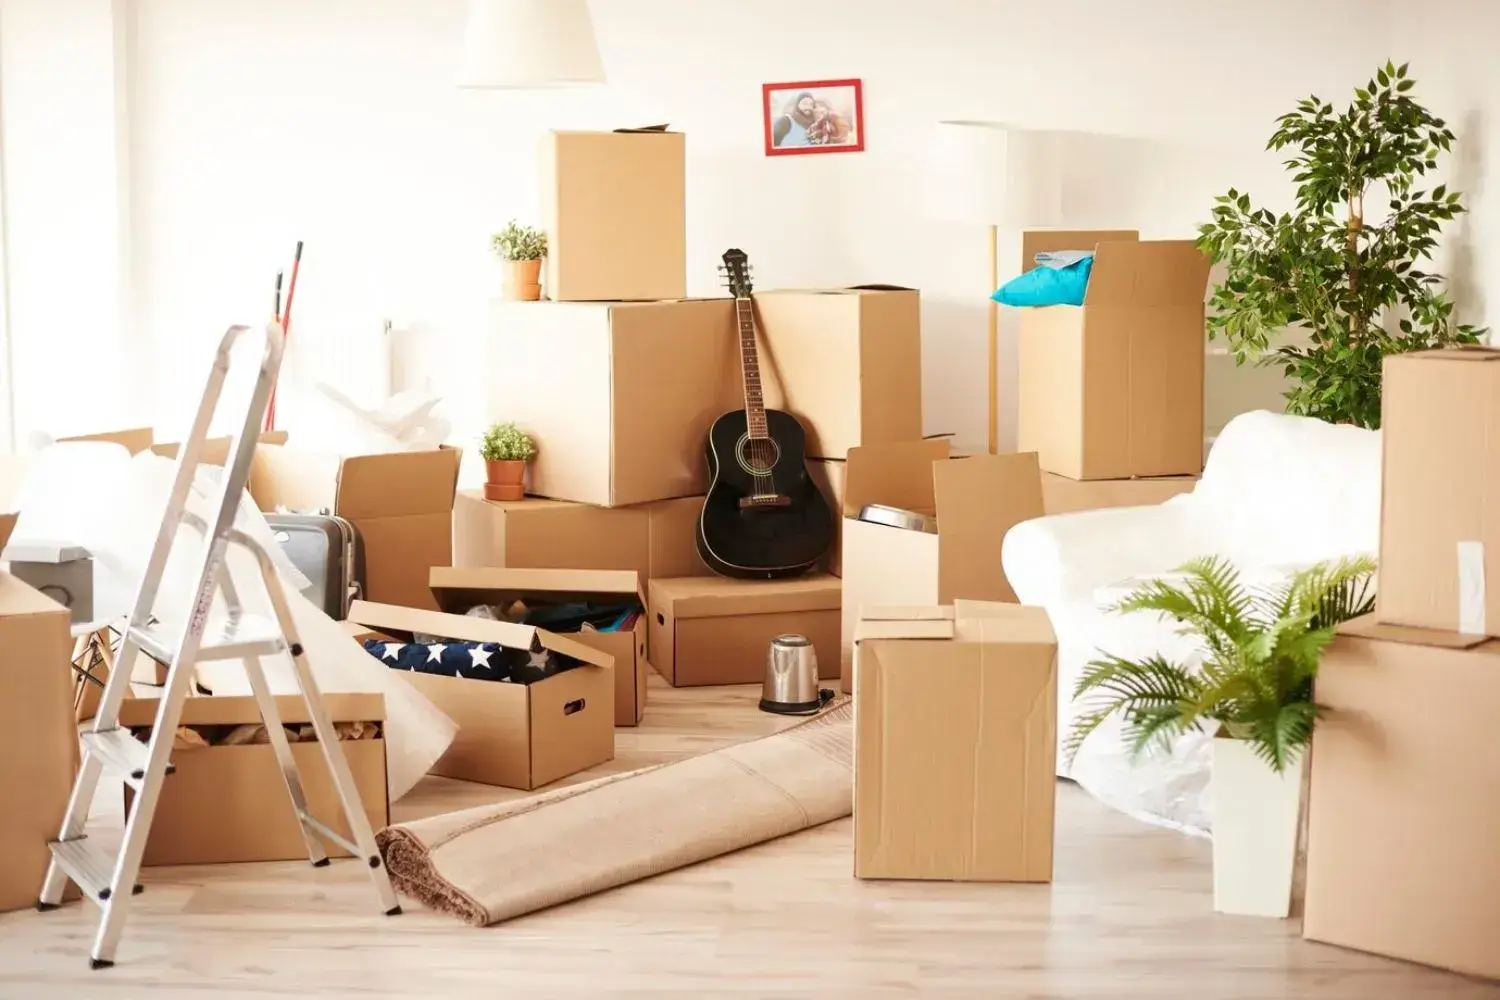 Hire Local Moving Company at Best Price in Union City, NJ